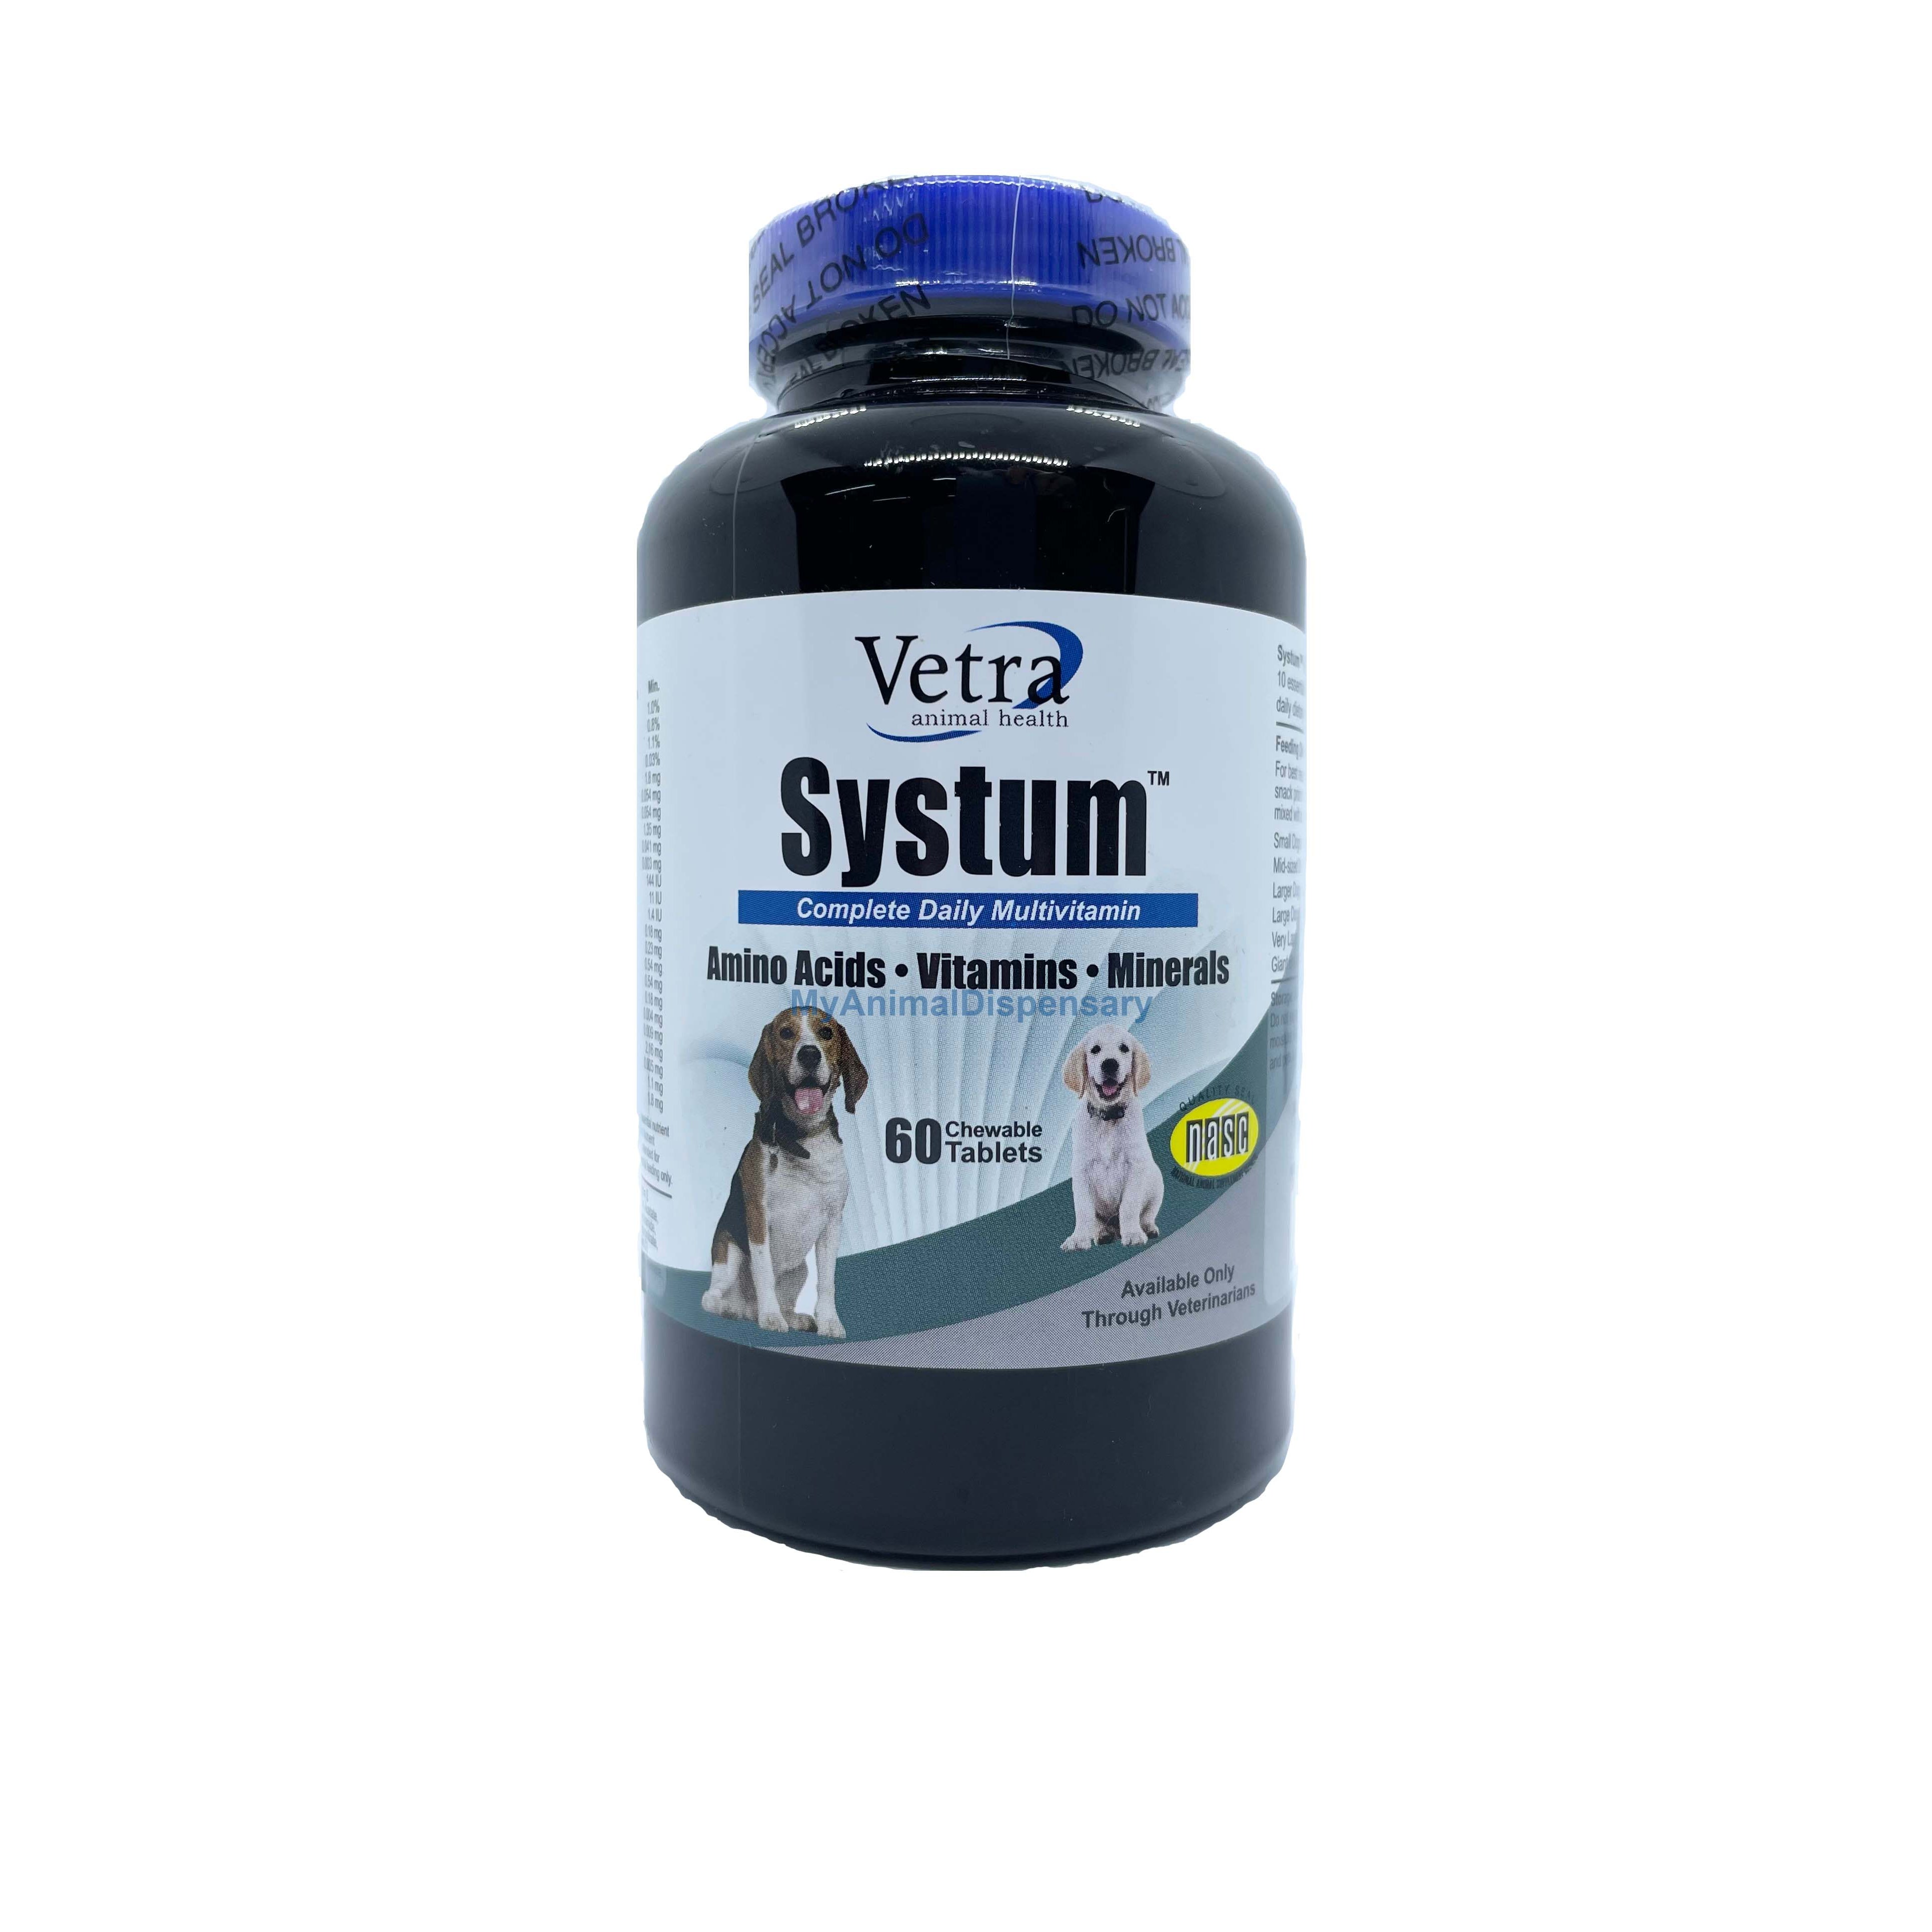 Vetra Systum Daily Multivitamin for Dogs & Cats (60 tablets)